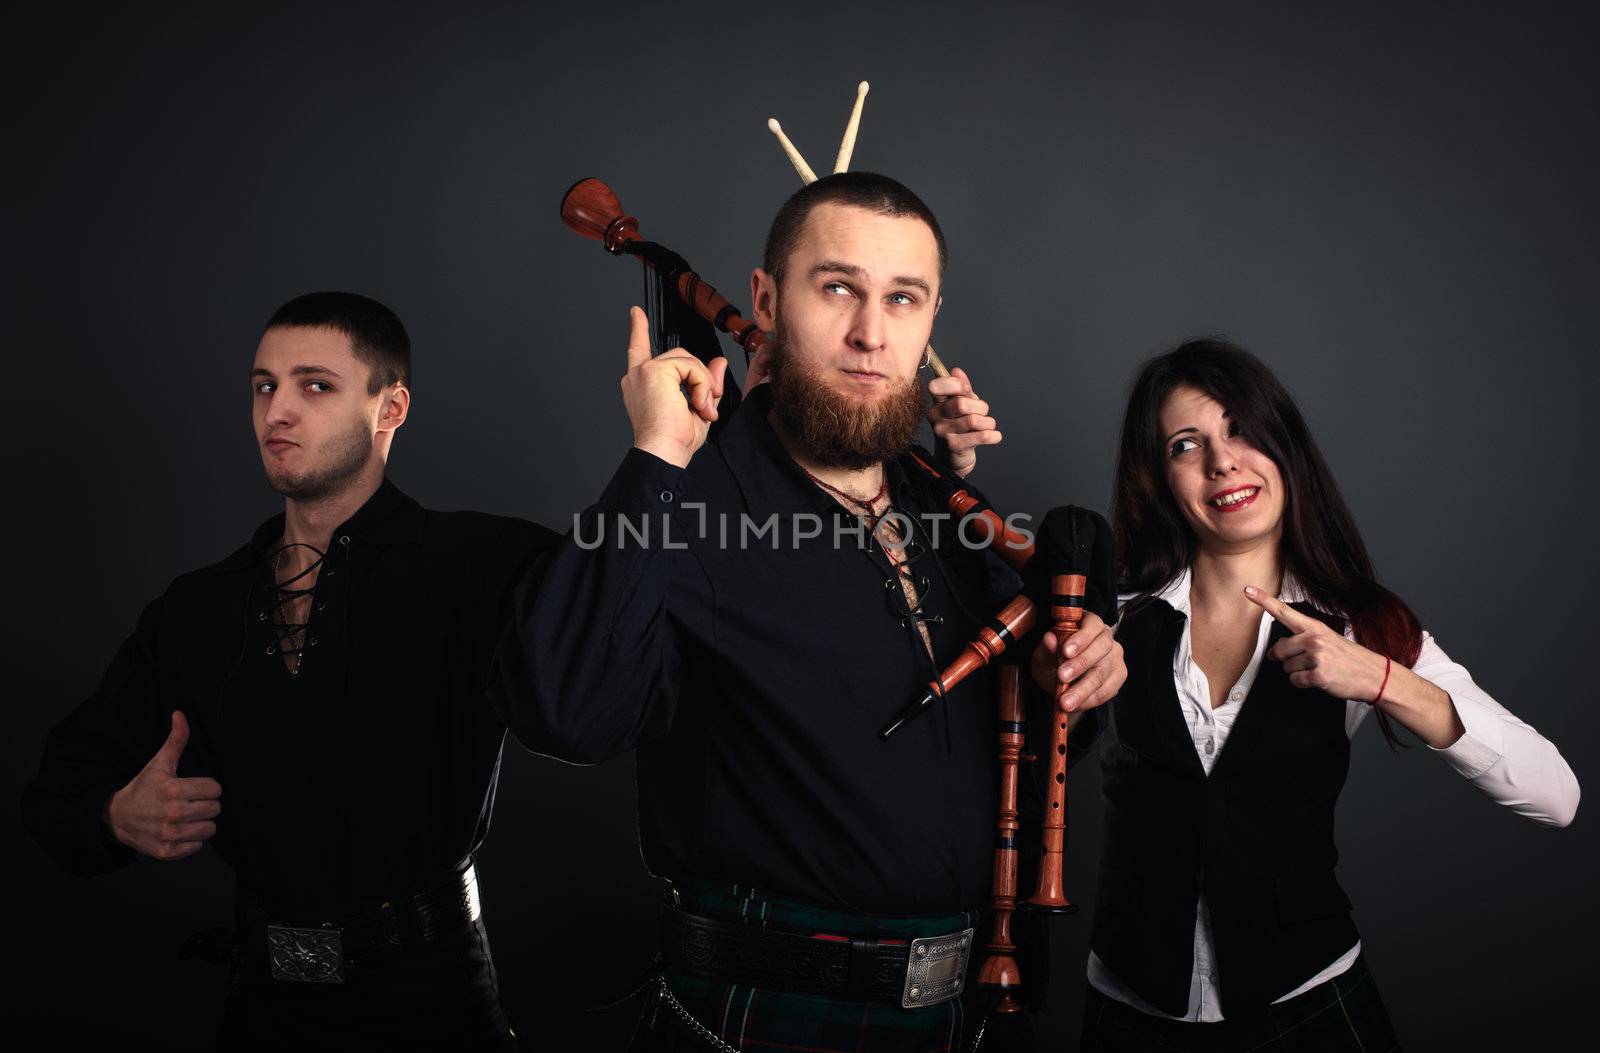 Musical band in scottish costumes with pipe and drums. Studio shot